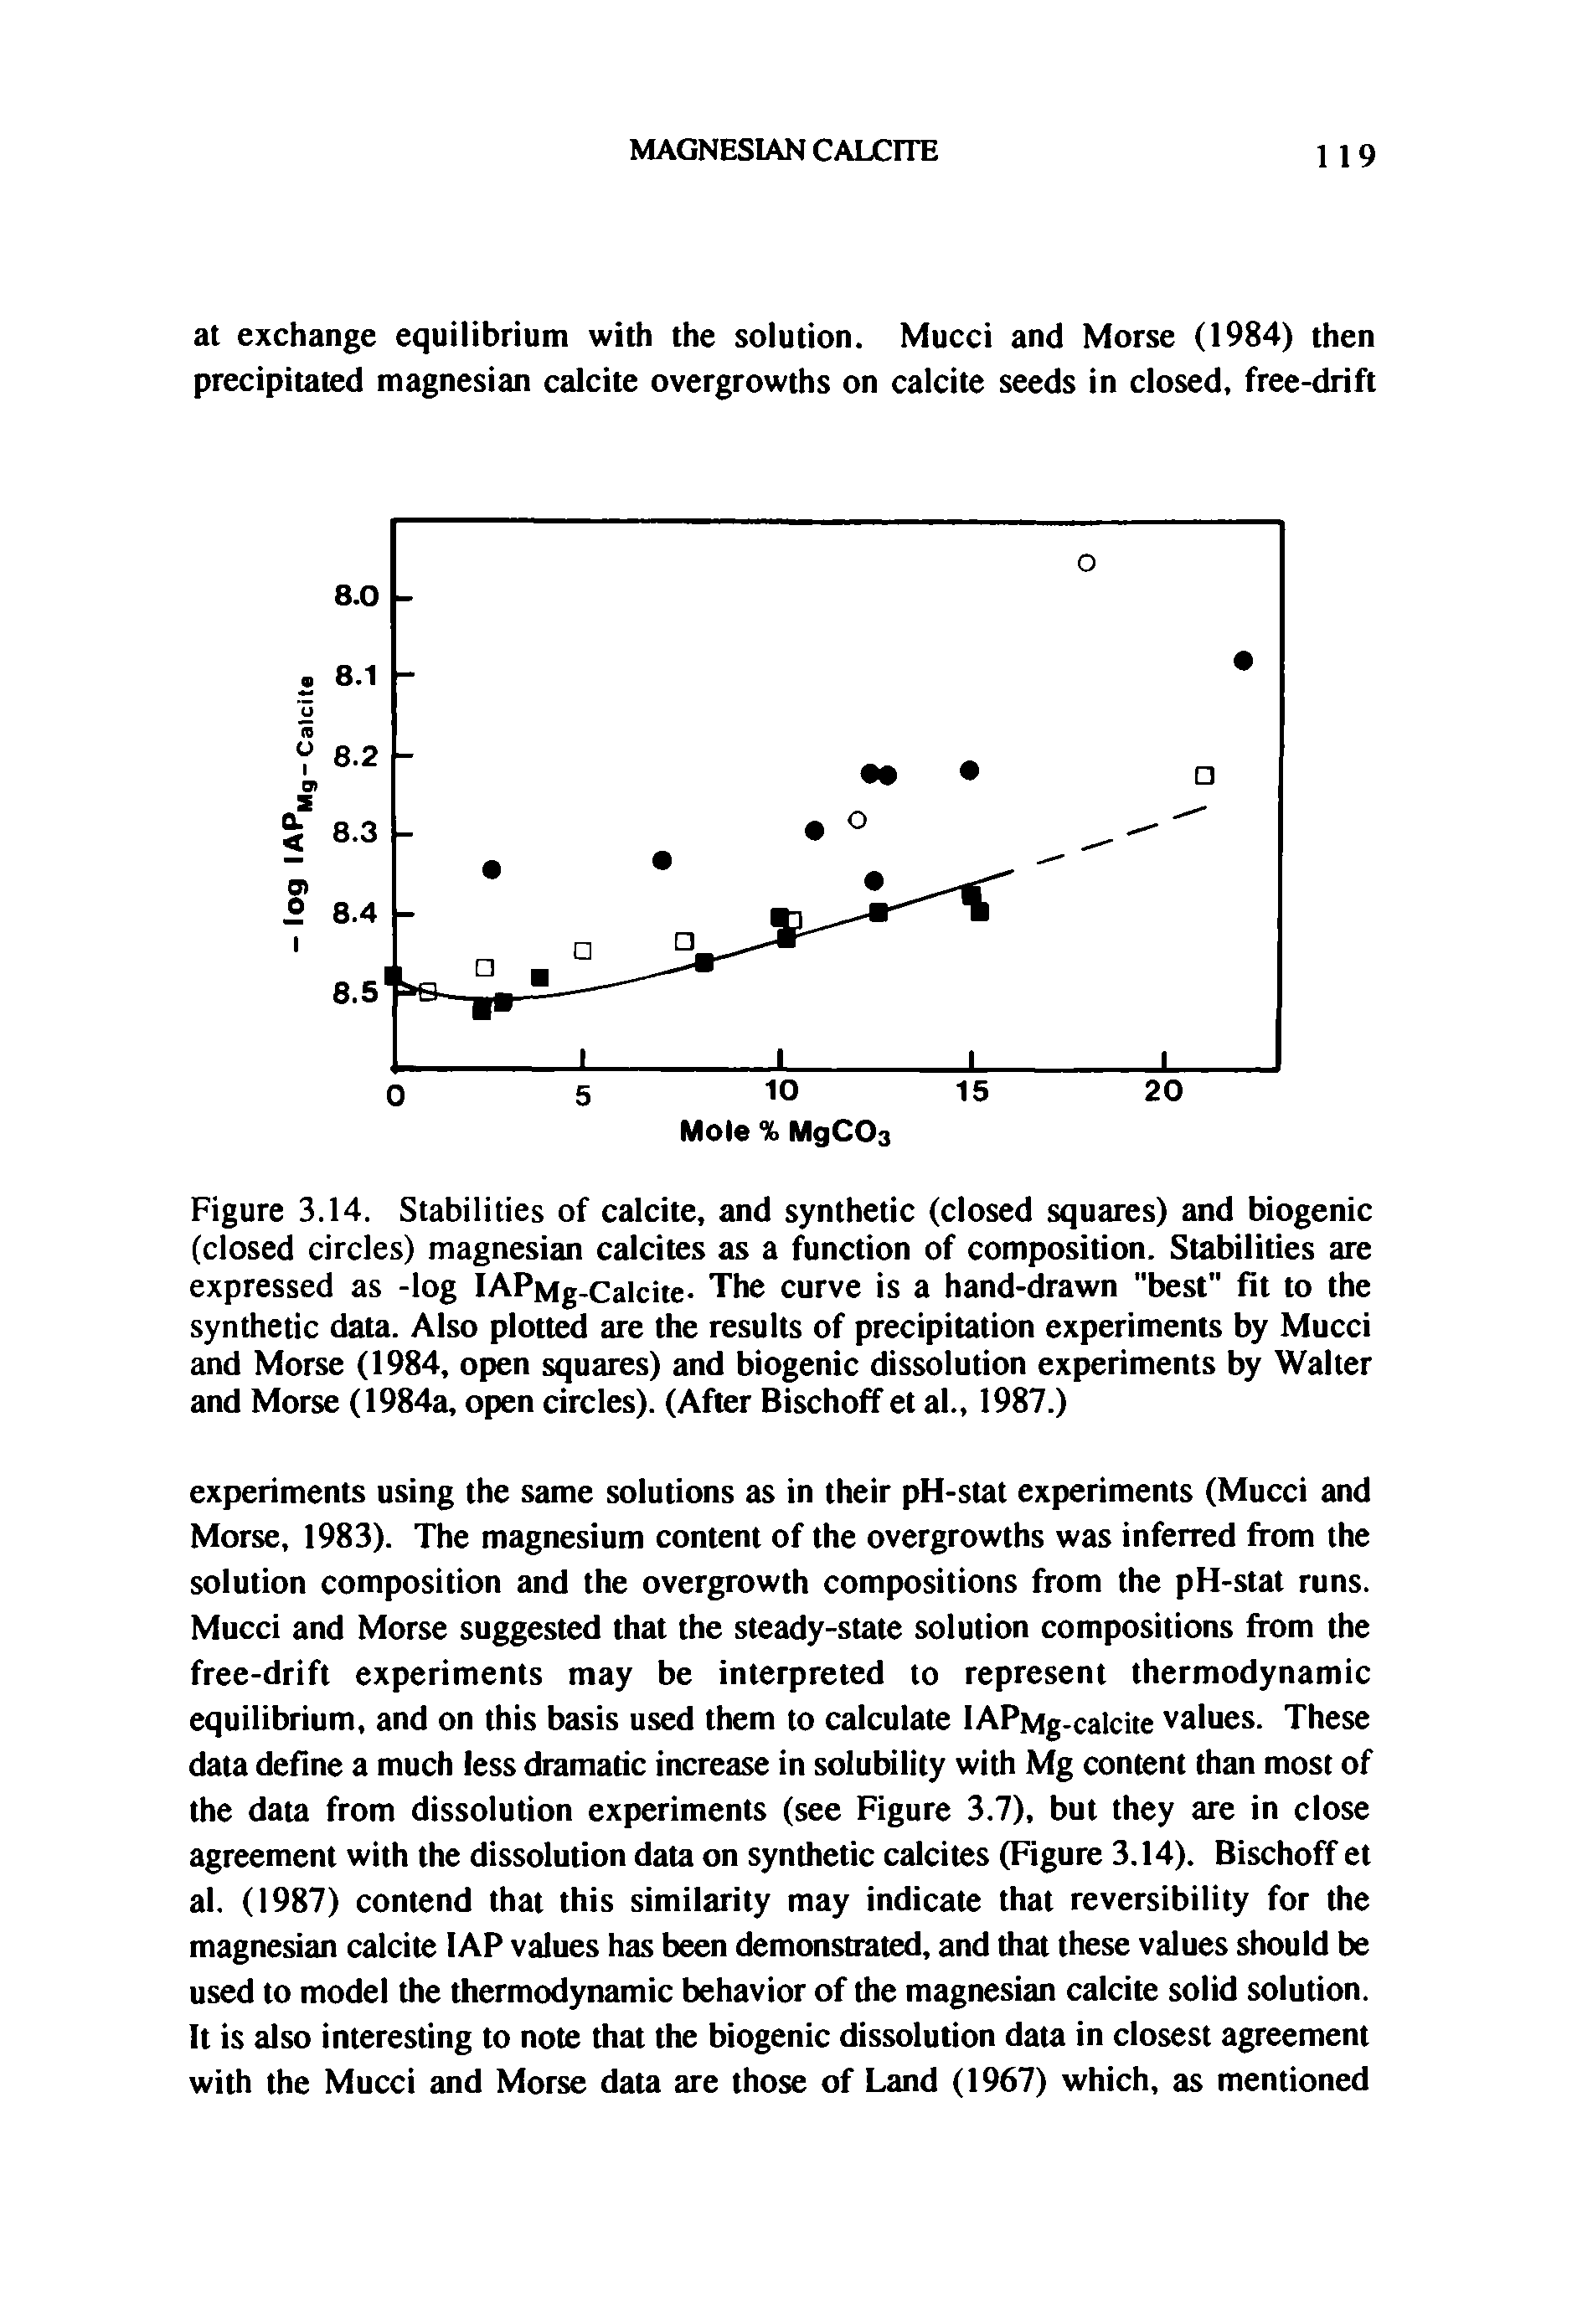 Figure 3.14. Stabilities of calcite, and synthetic (closed squares) and biogenic (closed circles) magnesian calcites as a function of composition. Stabilities are expressed as -log IAPMg-Calcite- The curve is a hand-drawn "best" fit to the synthetic data. Also plotted are the results of precipitation experiments by Mucci and Morse (1984, open squares) and biogenic dissolution experiments by Walter and Morse (1984a, open circles). (After Bischoff et al., 1987.)...